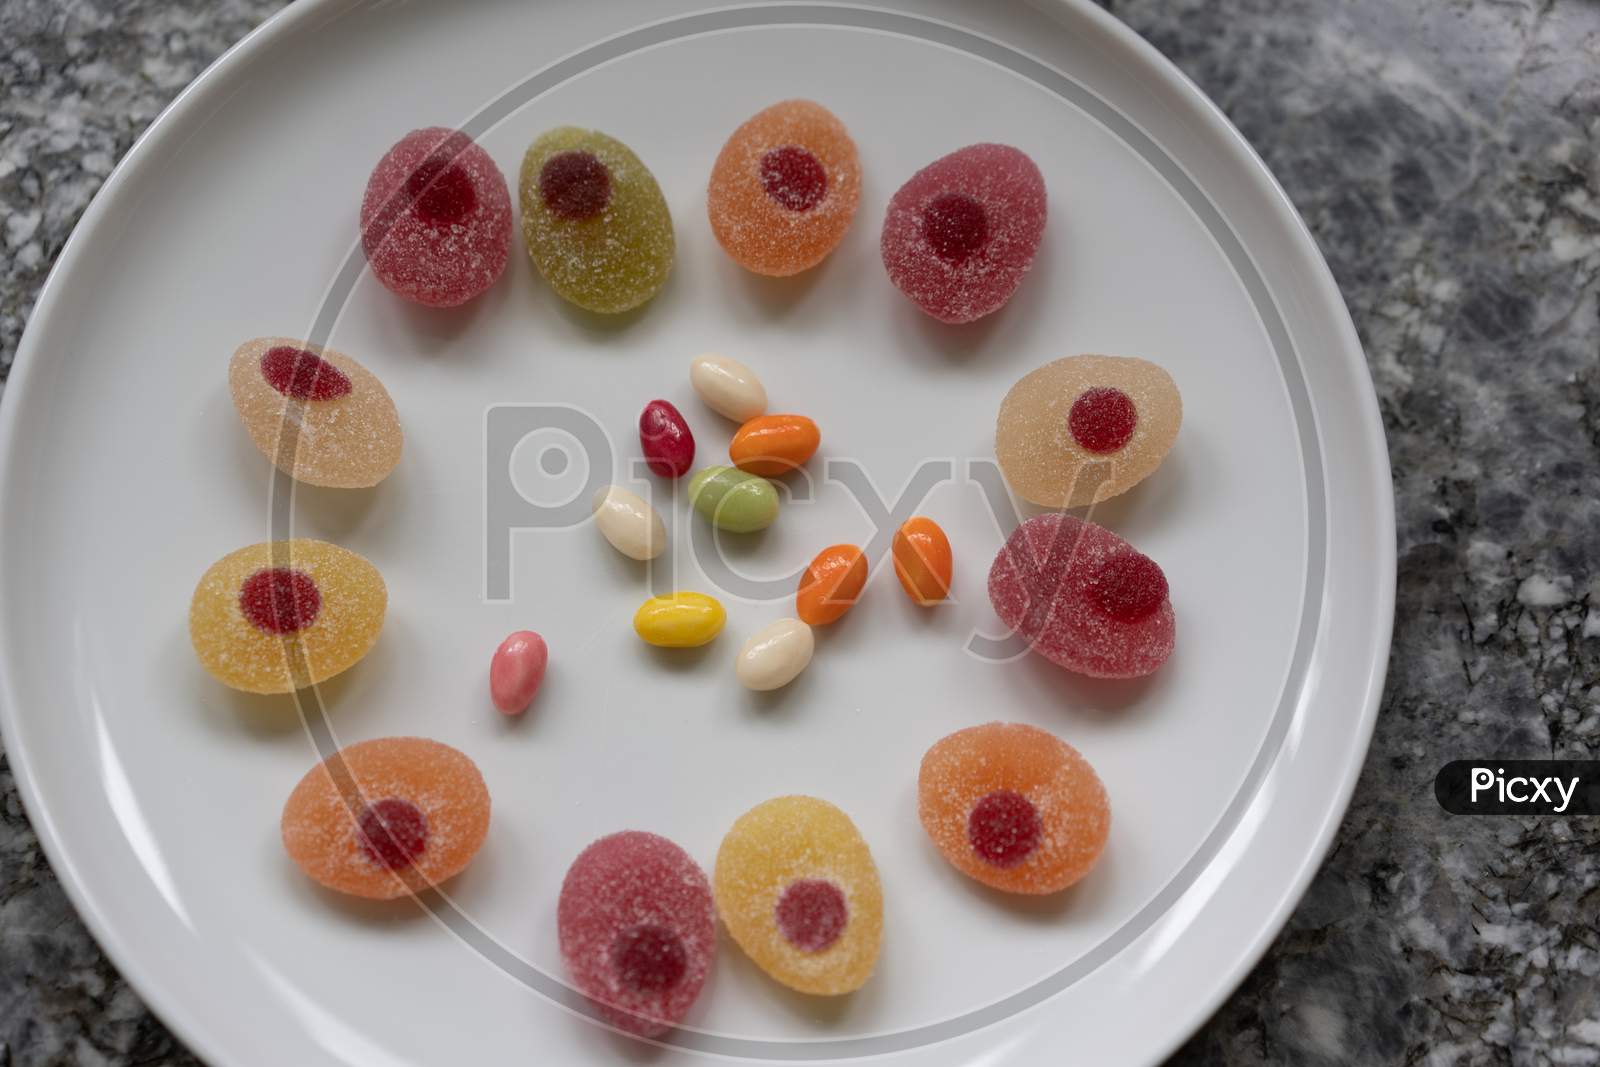 Sweeties For Easter. Easter Candies In A Circle On A White Plate On A Gray Granite Table.